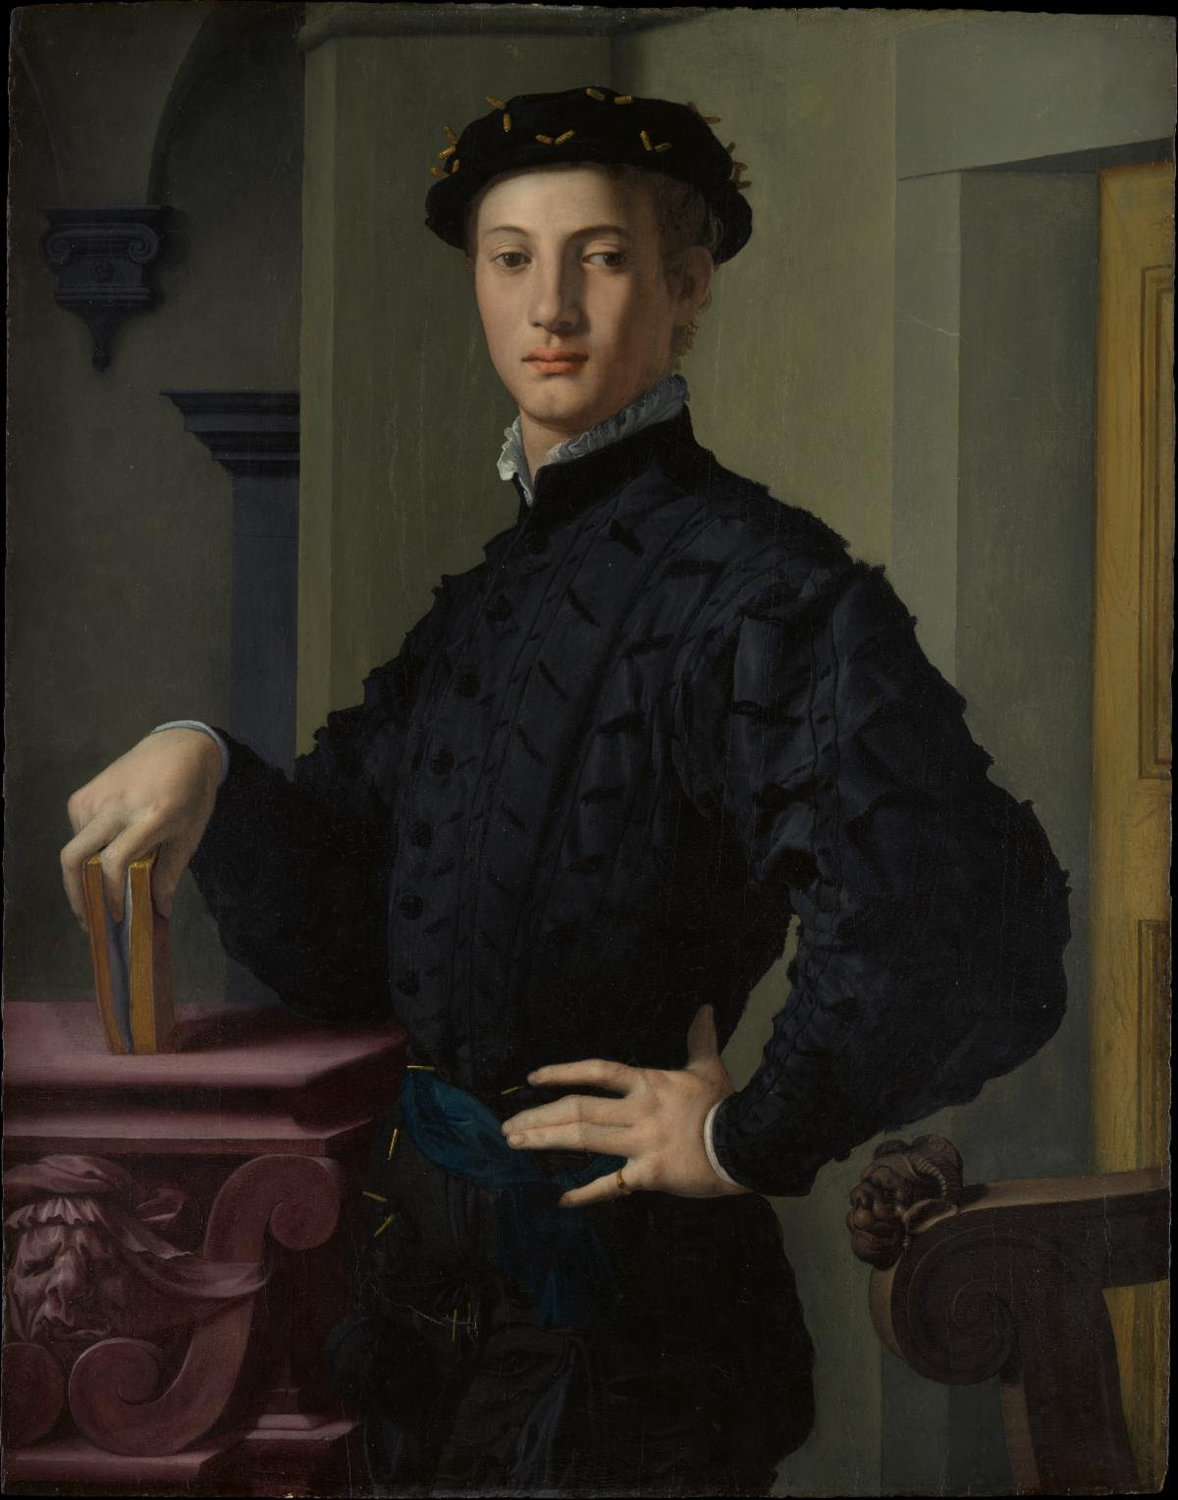 Bronzino (Agnolo di Cosimo di Mariano) (Italian, Monticelli 1503–1572 Florence). Portrait of a Young Man, 1530s. Oil on wood, 37 5/8 x 29 1/2 in. (95.6 x 74.9 cm). H. O. Havemeyer Collection, Bequest of Mrs. H. O. Havemeyer, 1929 (29.100.16)